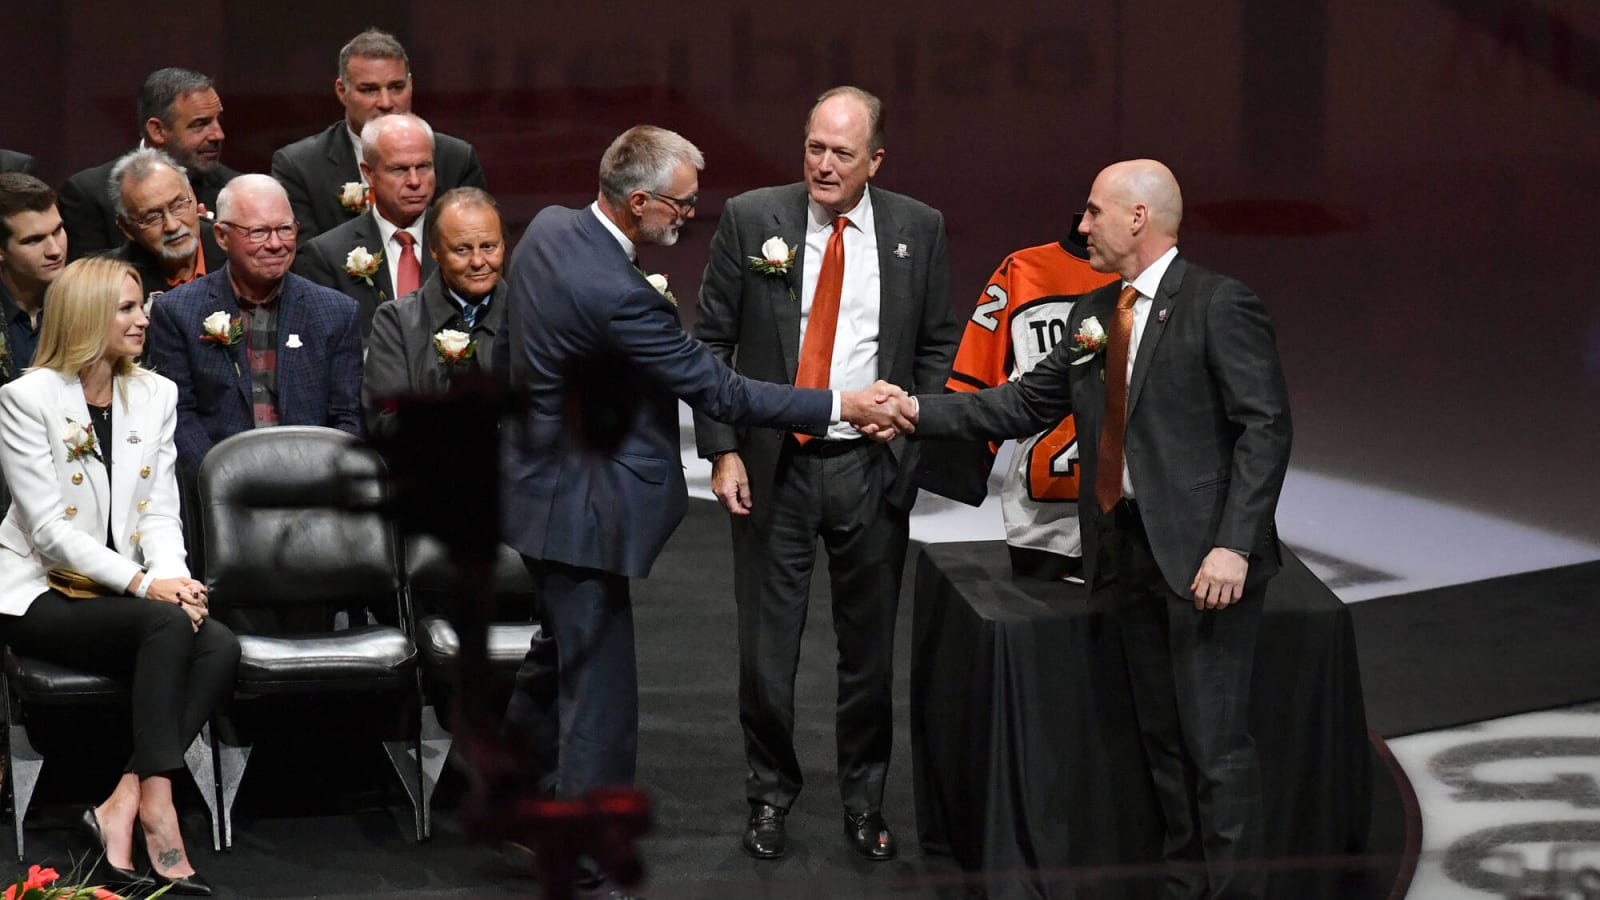 Scott will retire as Chairman; Flyers Sign Andrae to ELC